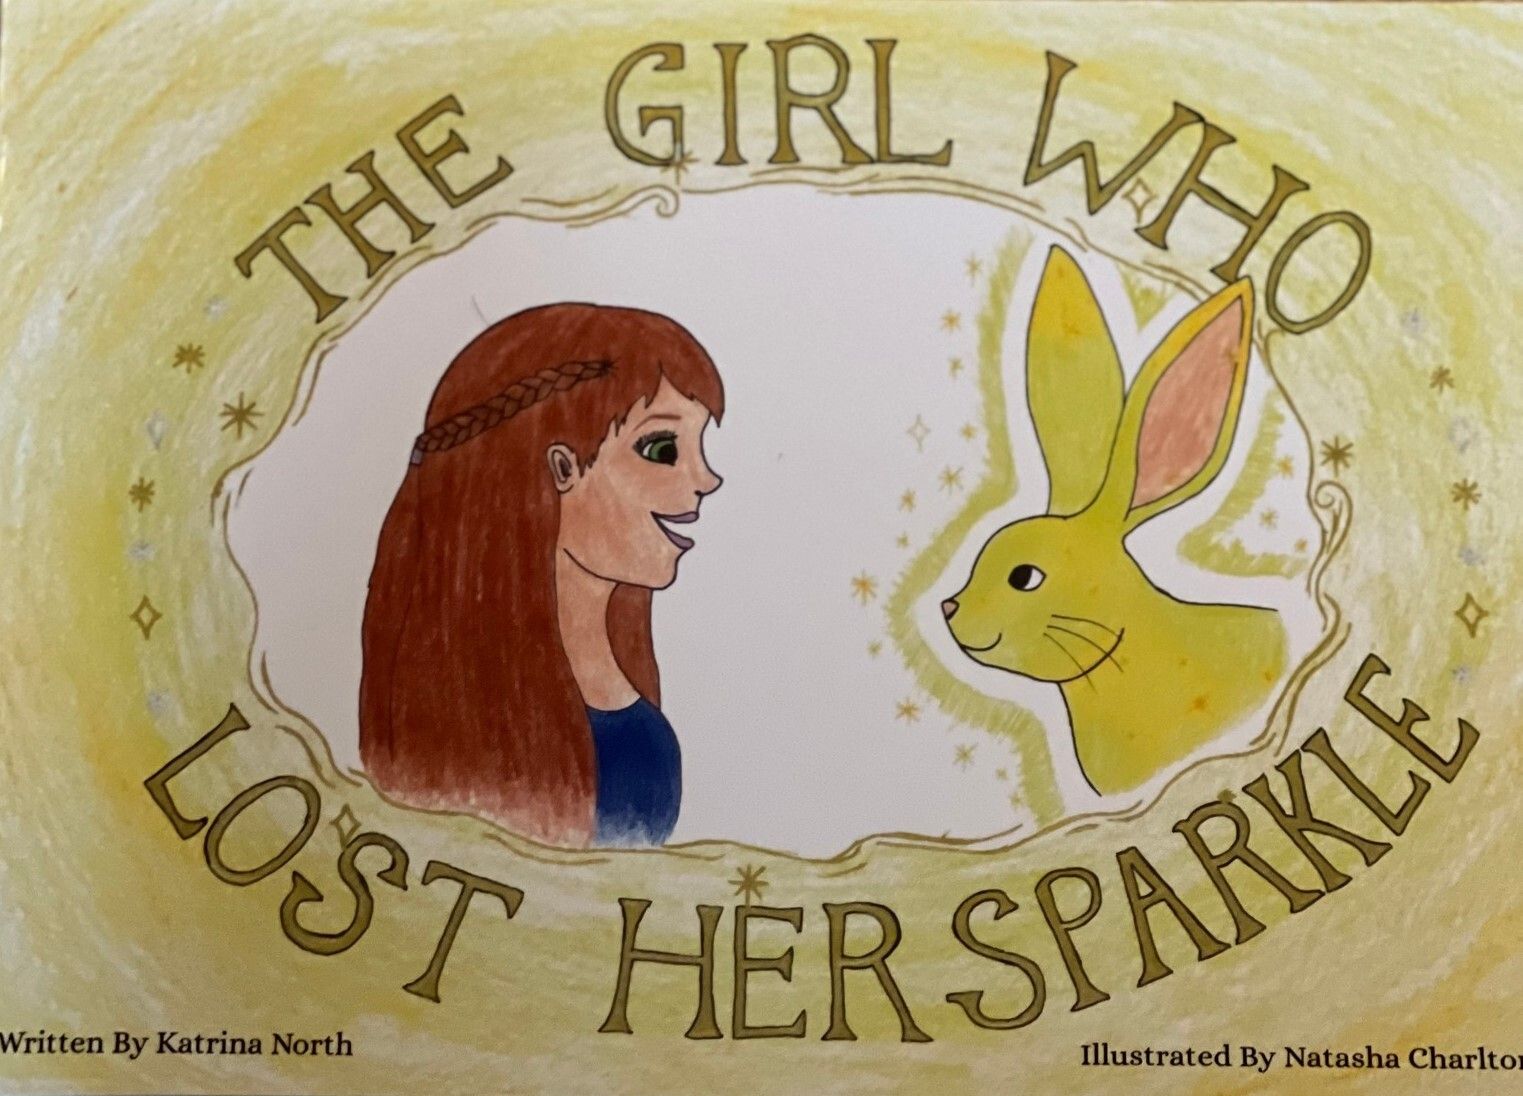 Book about The Girl Who Lost Her Sparkle